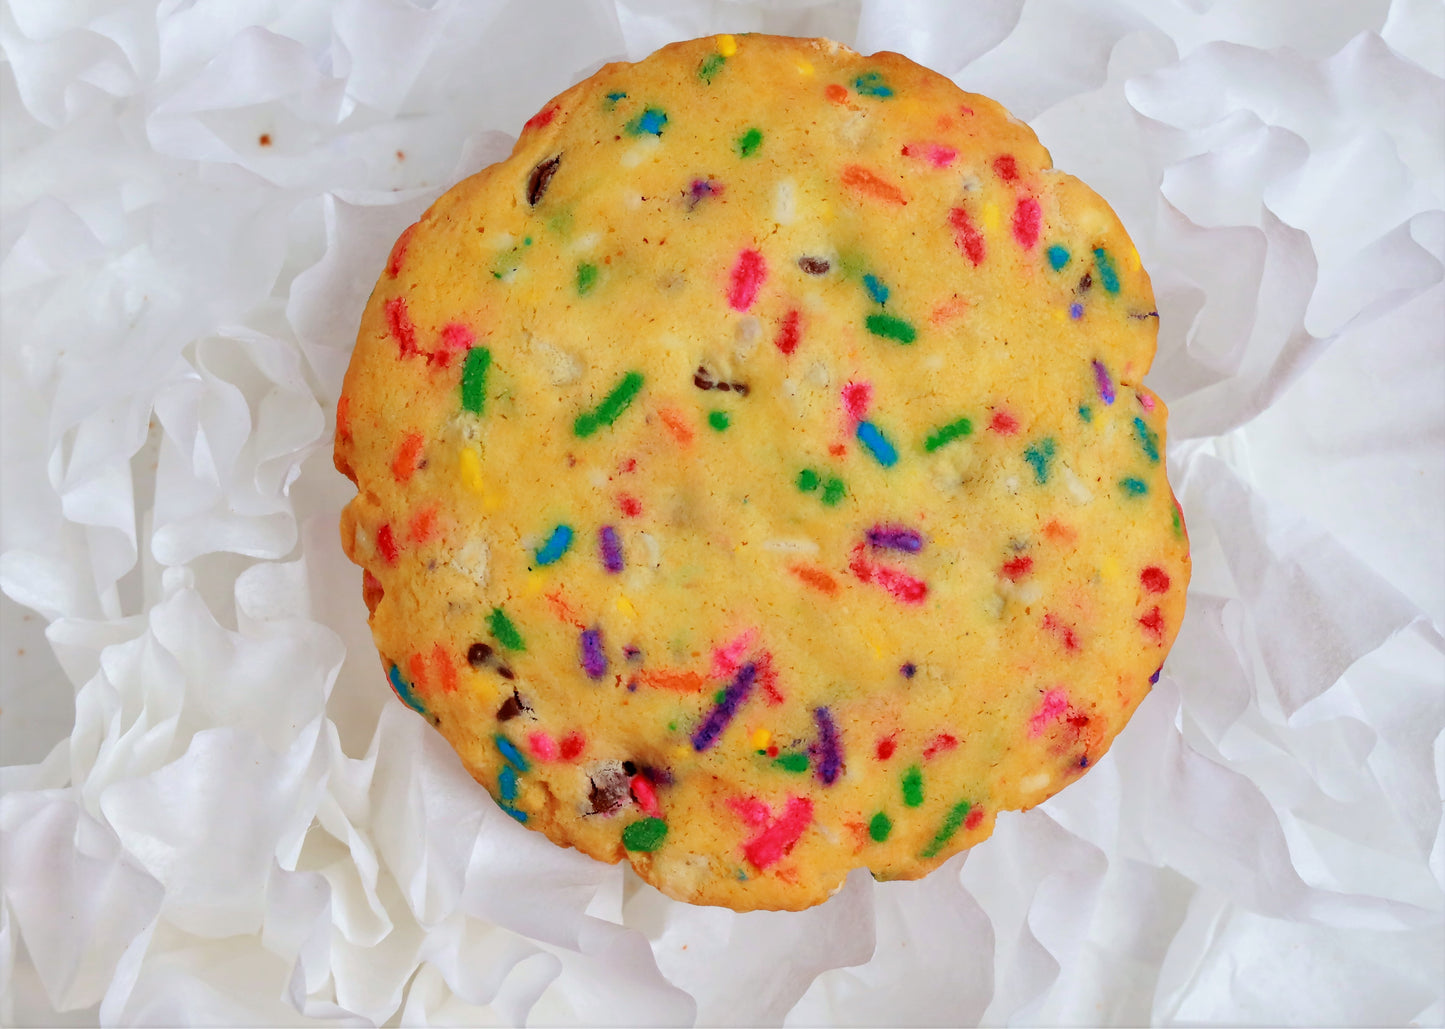 Party cookies